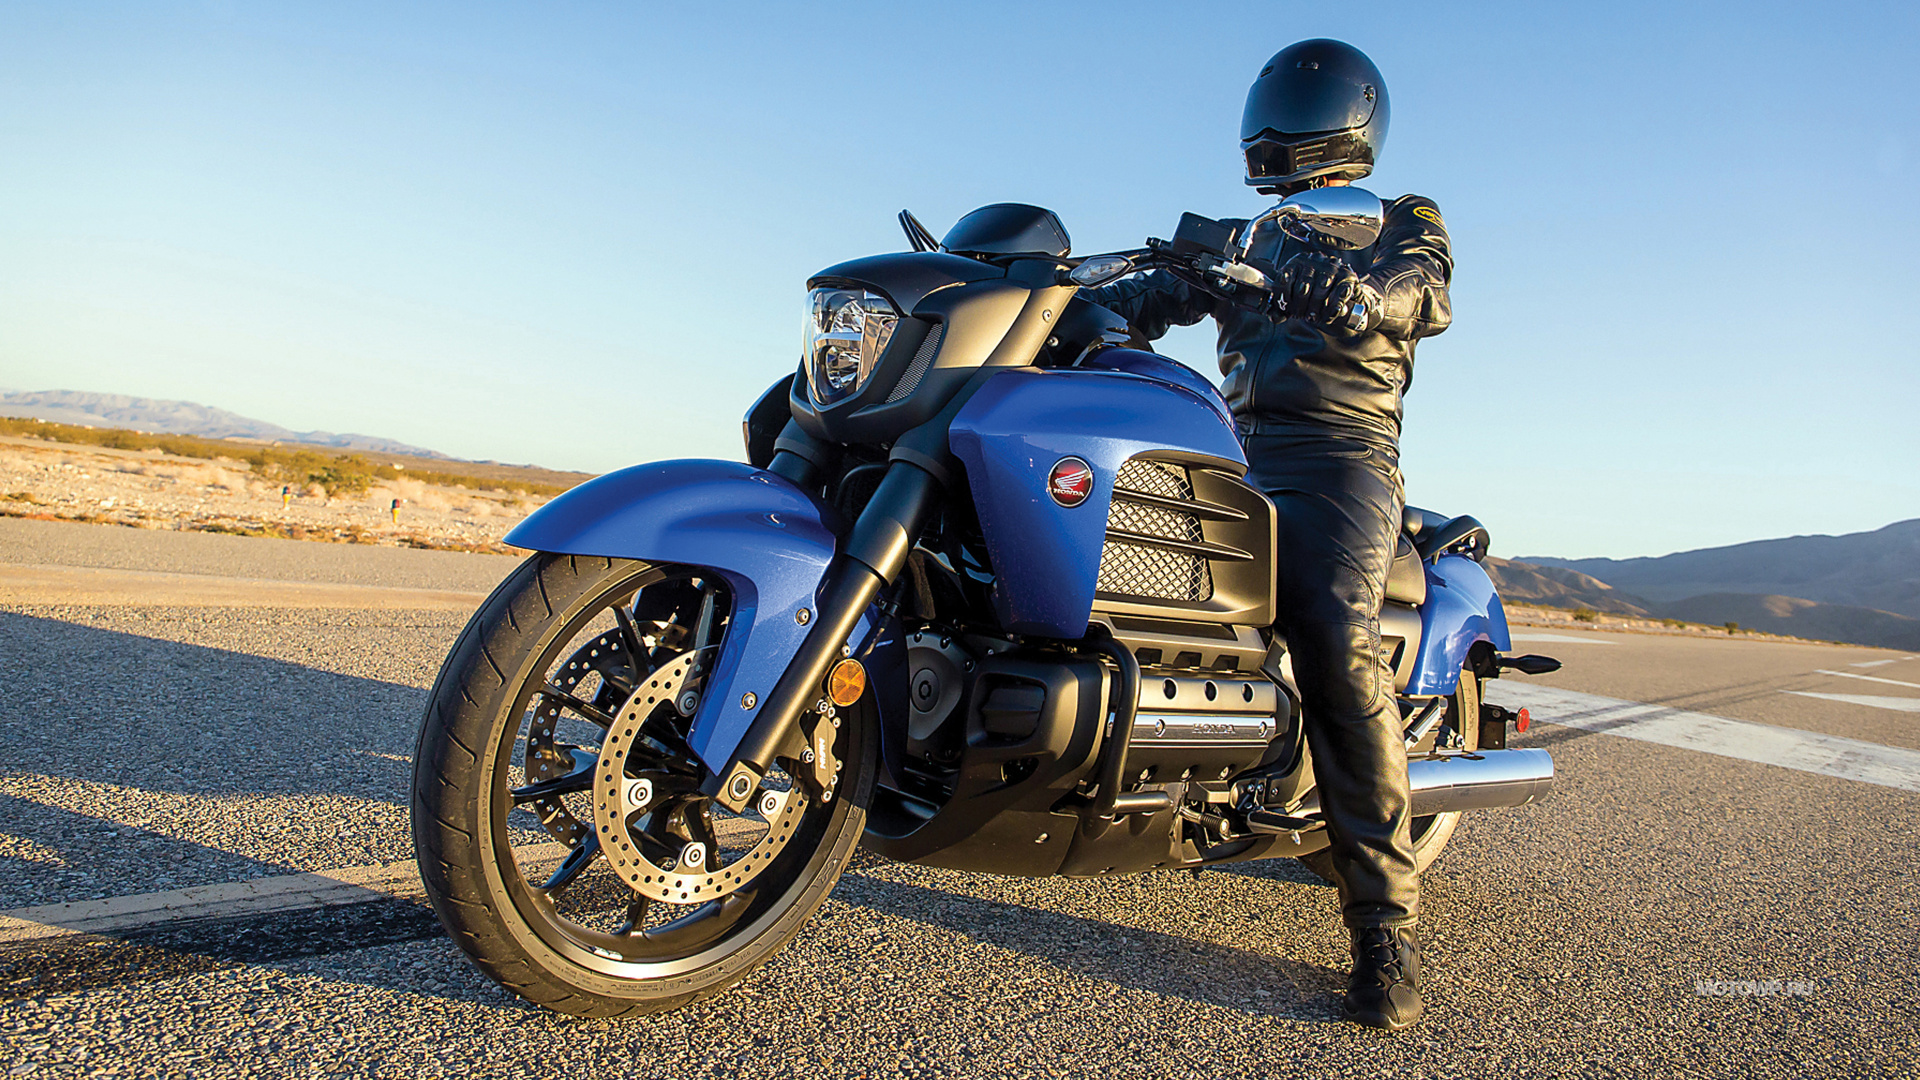 Man in Black Leather Jacket and Black Pants Riding Blue and Black Motorcycle. Wallpaper in 1920x1080 Resolution